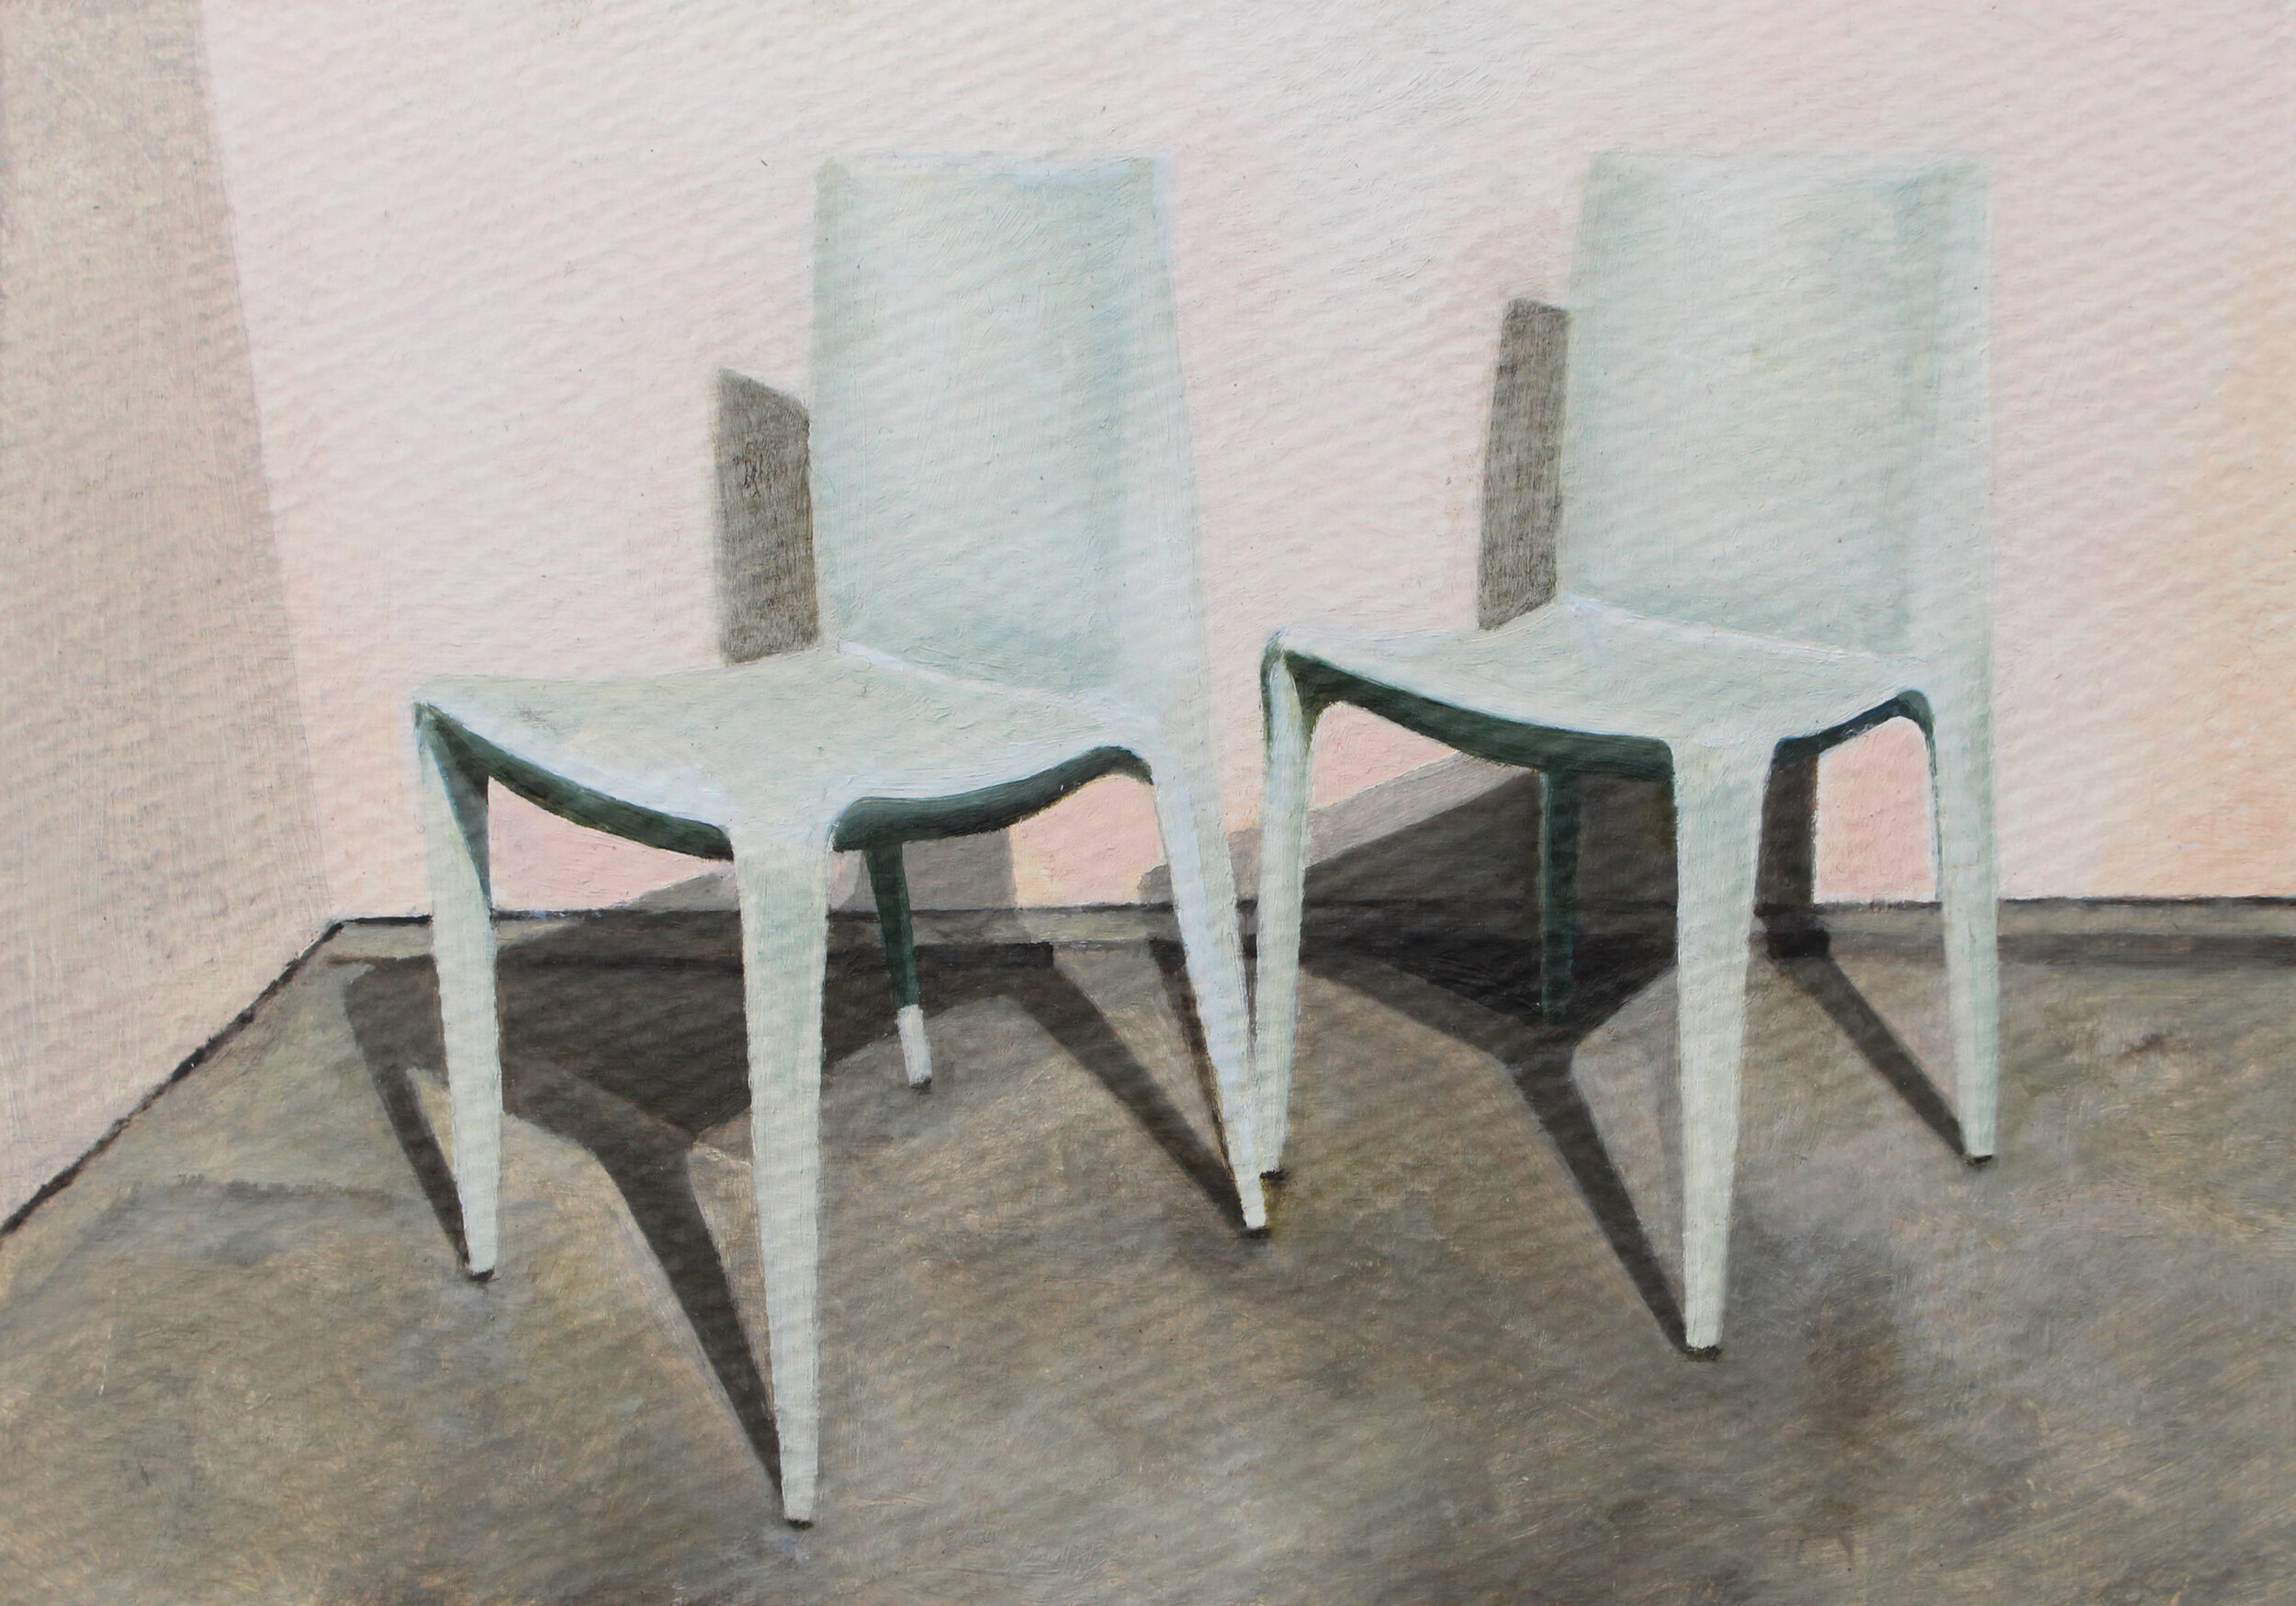  Chair 9, 2020  oil on paper  5 x 7 in 